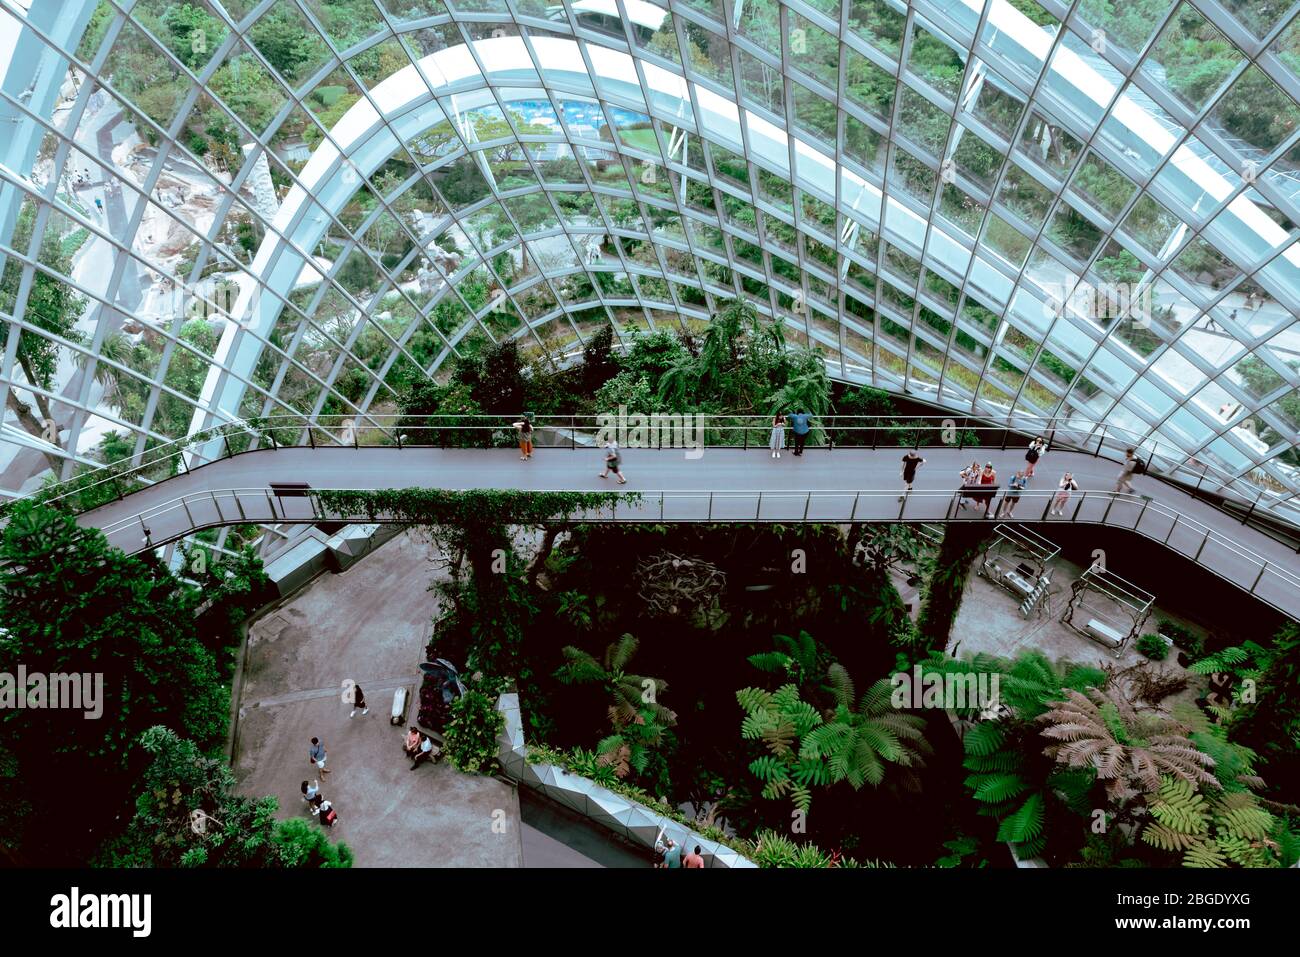 Singapore, Oct 2019: Cloud Forest Dome Conservatory at Gardens by the Bay in Singapore. Tourists walking on platforms inside greenhouse glass dome Stock Photo